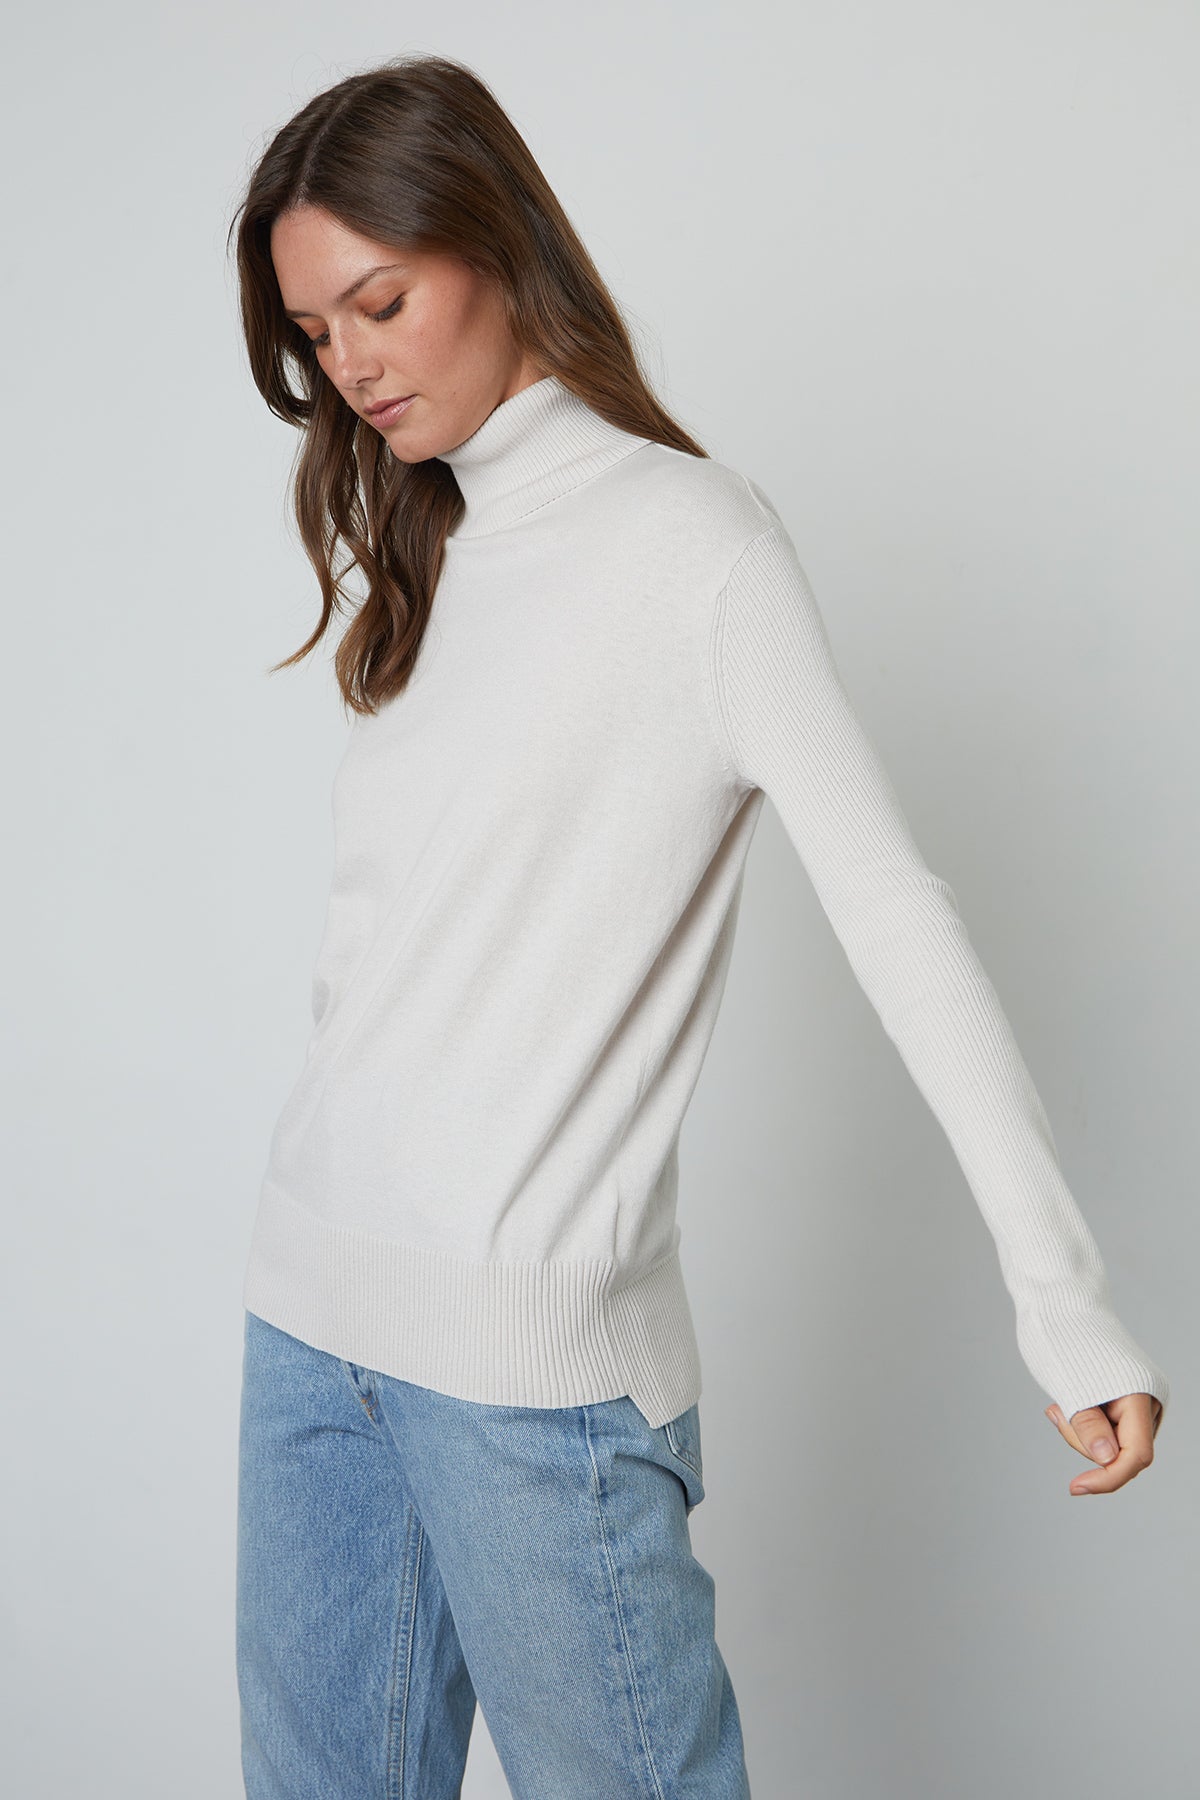 Lux Cotton Cashmere Renny Turtleneck Sweater in chalk front and side.-25052550660289